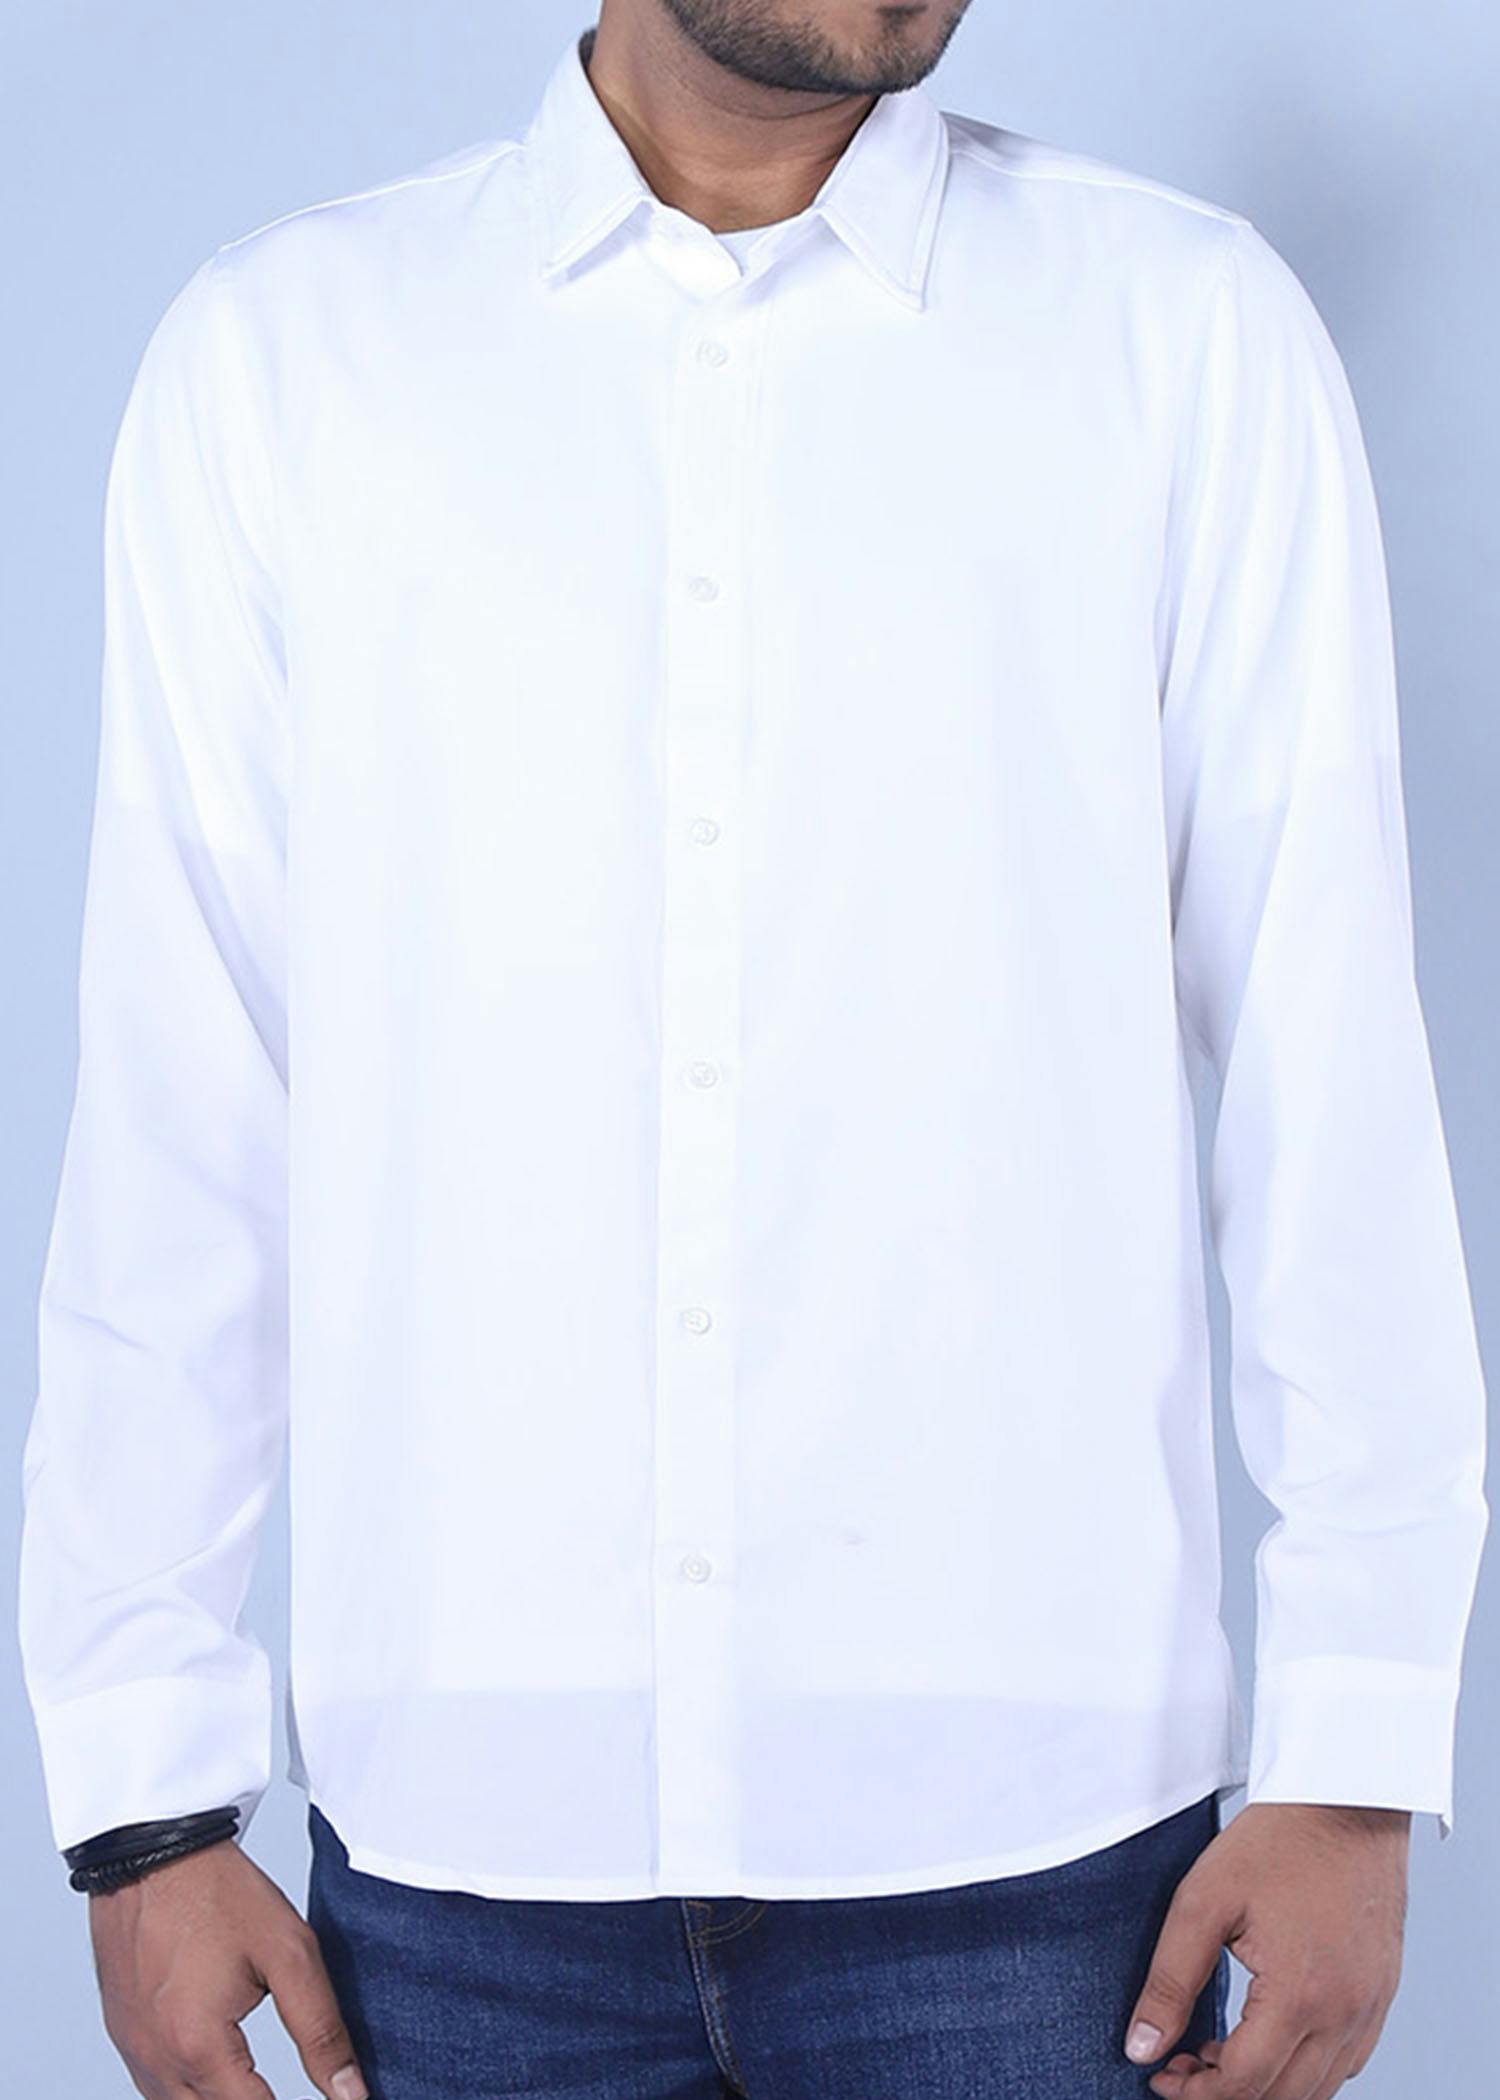 istanbul xxiv fs shirt white color headcropped